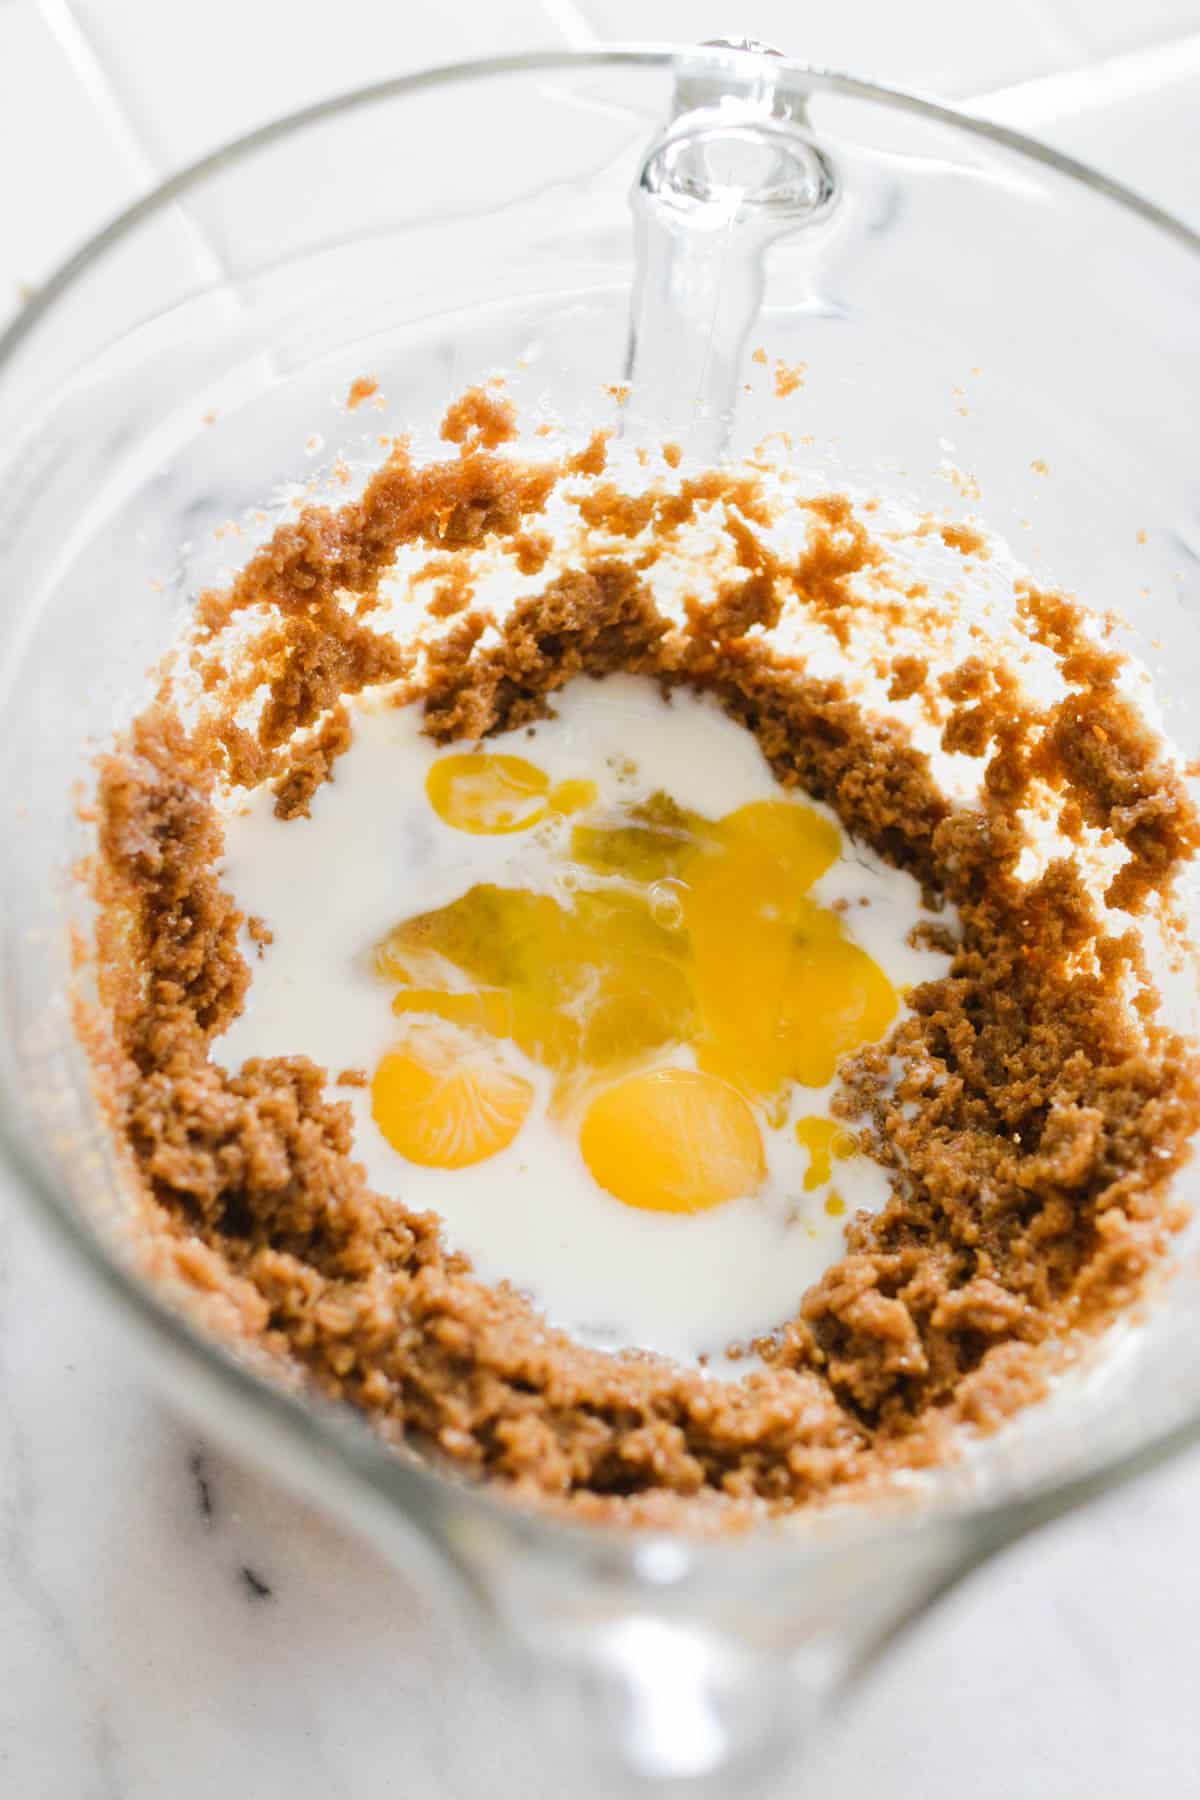 A mixing bowl with creamed brown sugar and butter with eggs and milk waiting to be mixed.